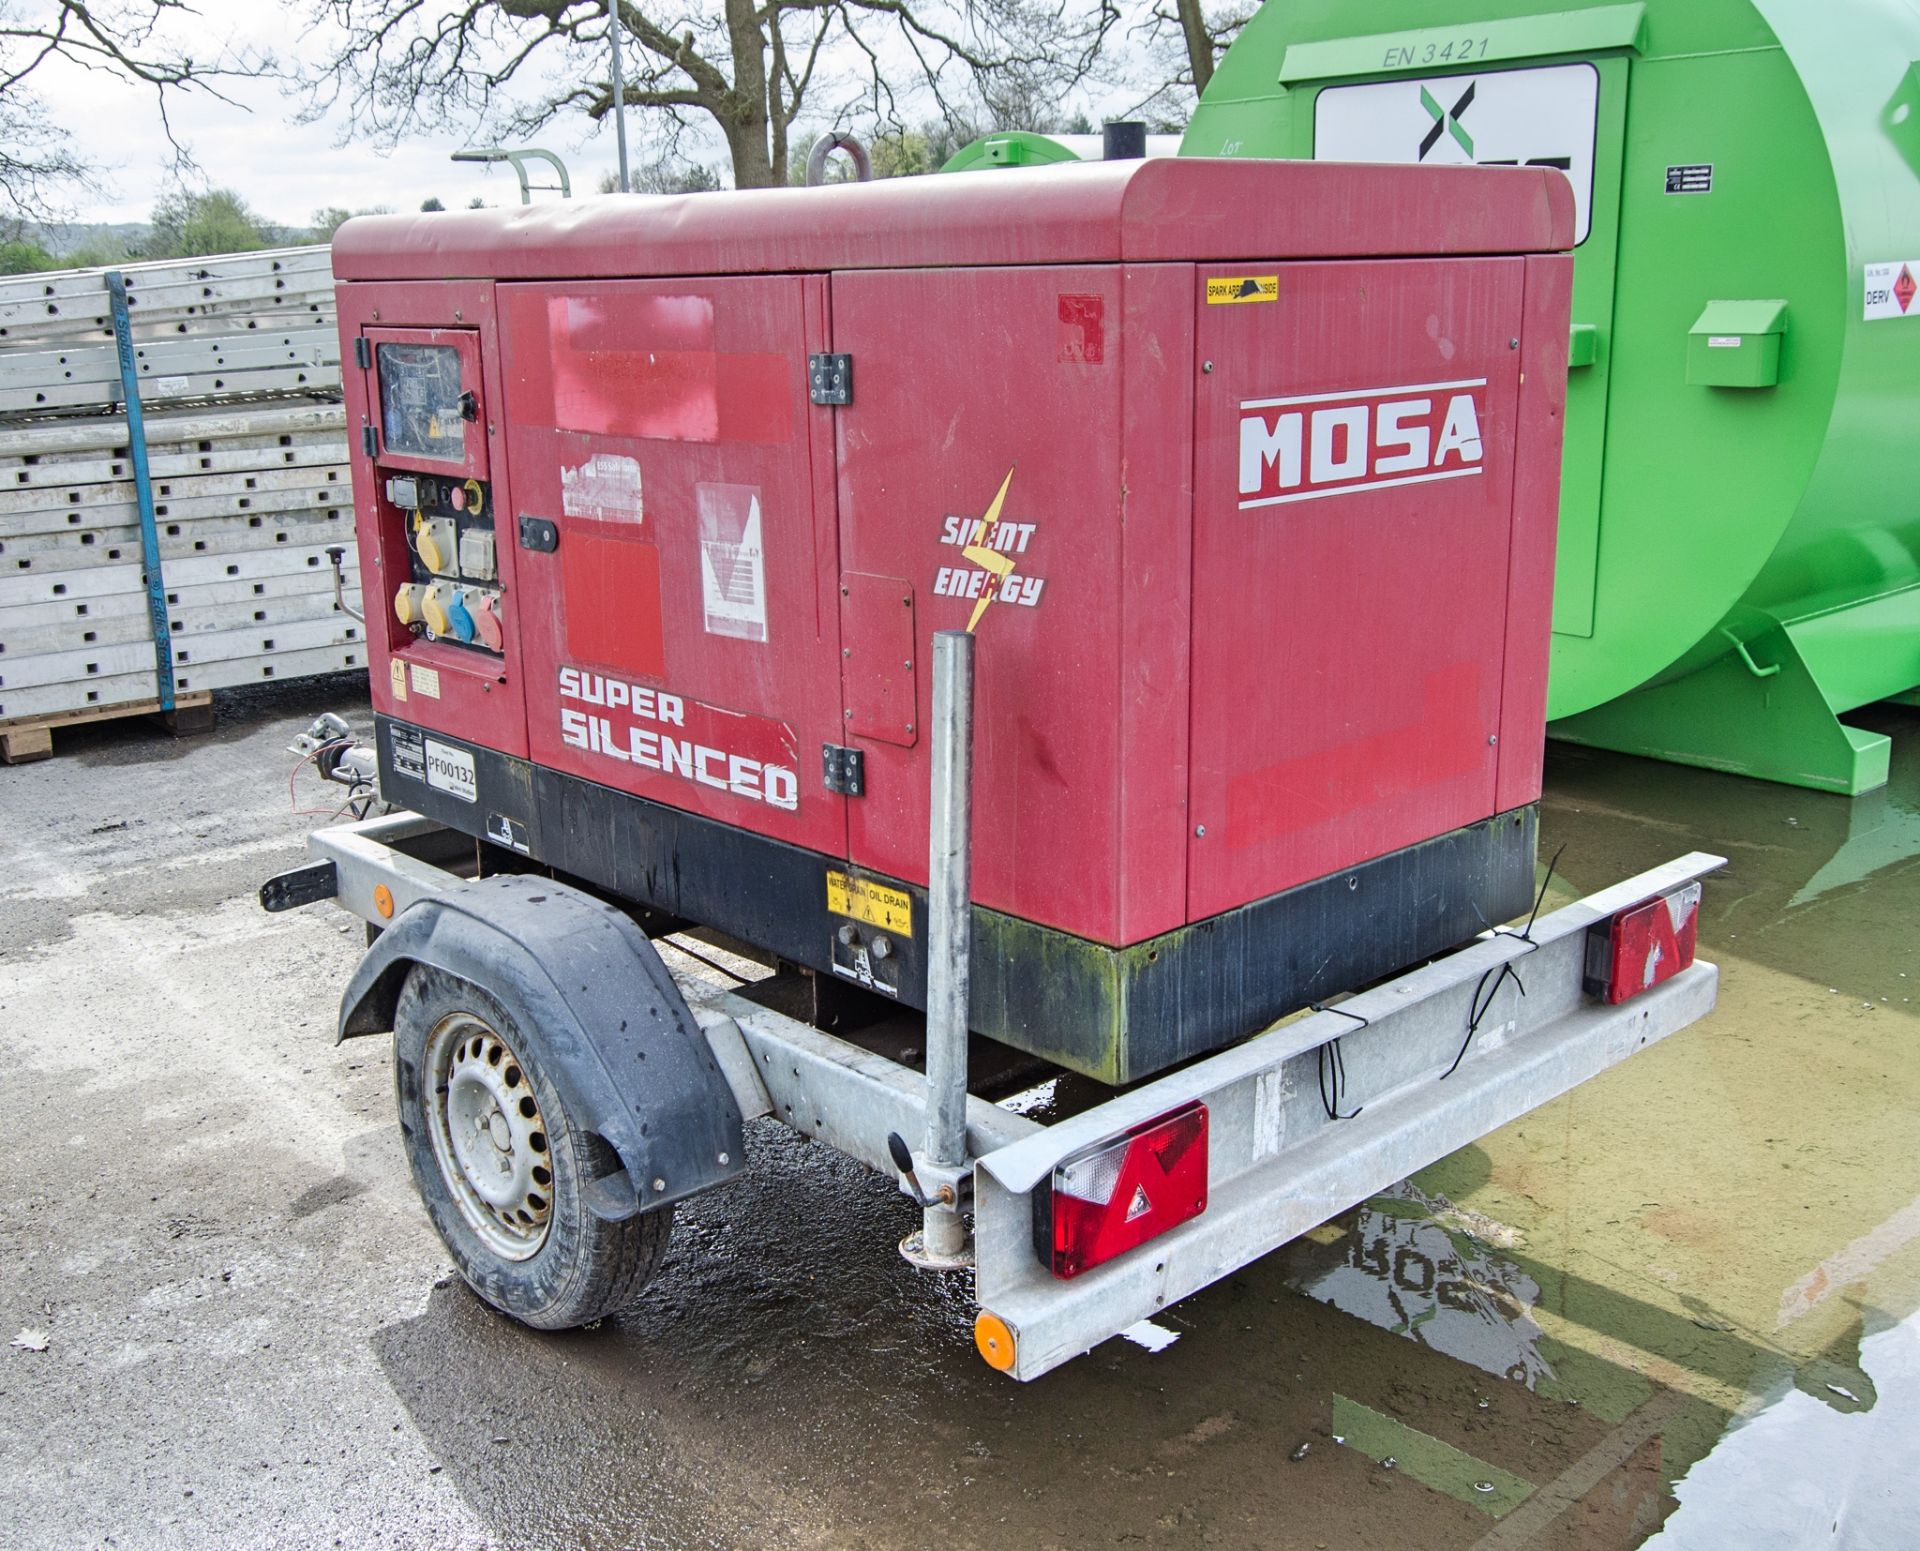 Mosa GE20 YSX 20 kva diesel driven fast tow mobile generator Year: 2015 S/N: 44516 PF00132 - Image 4 of 7